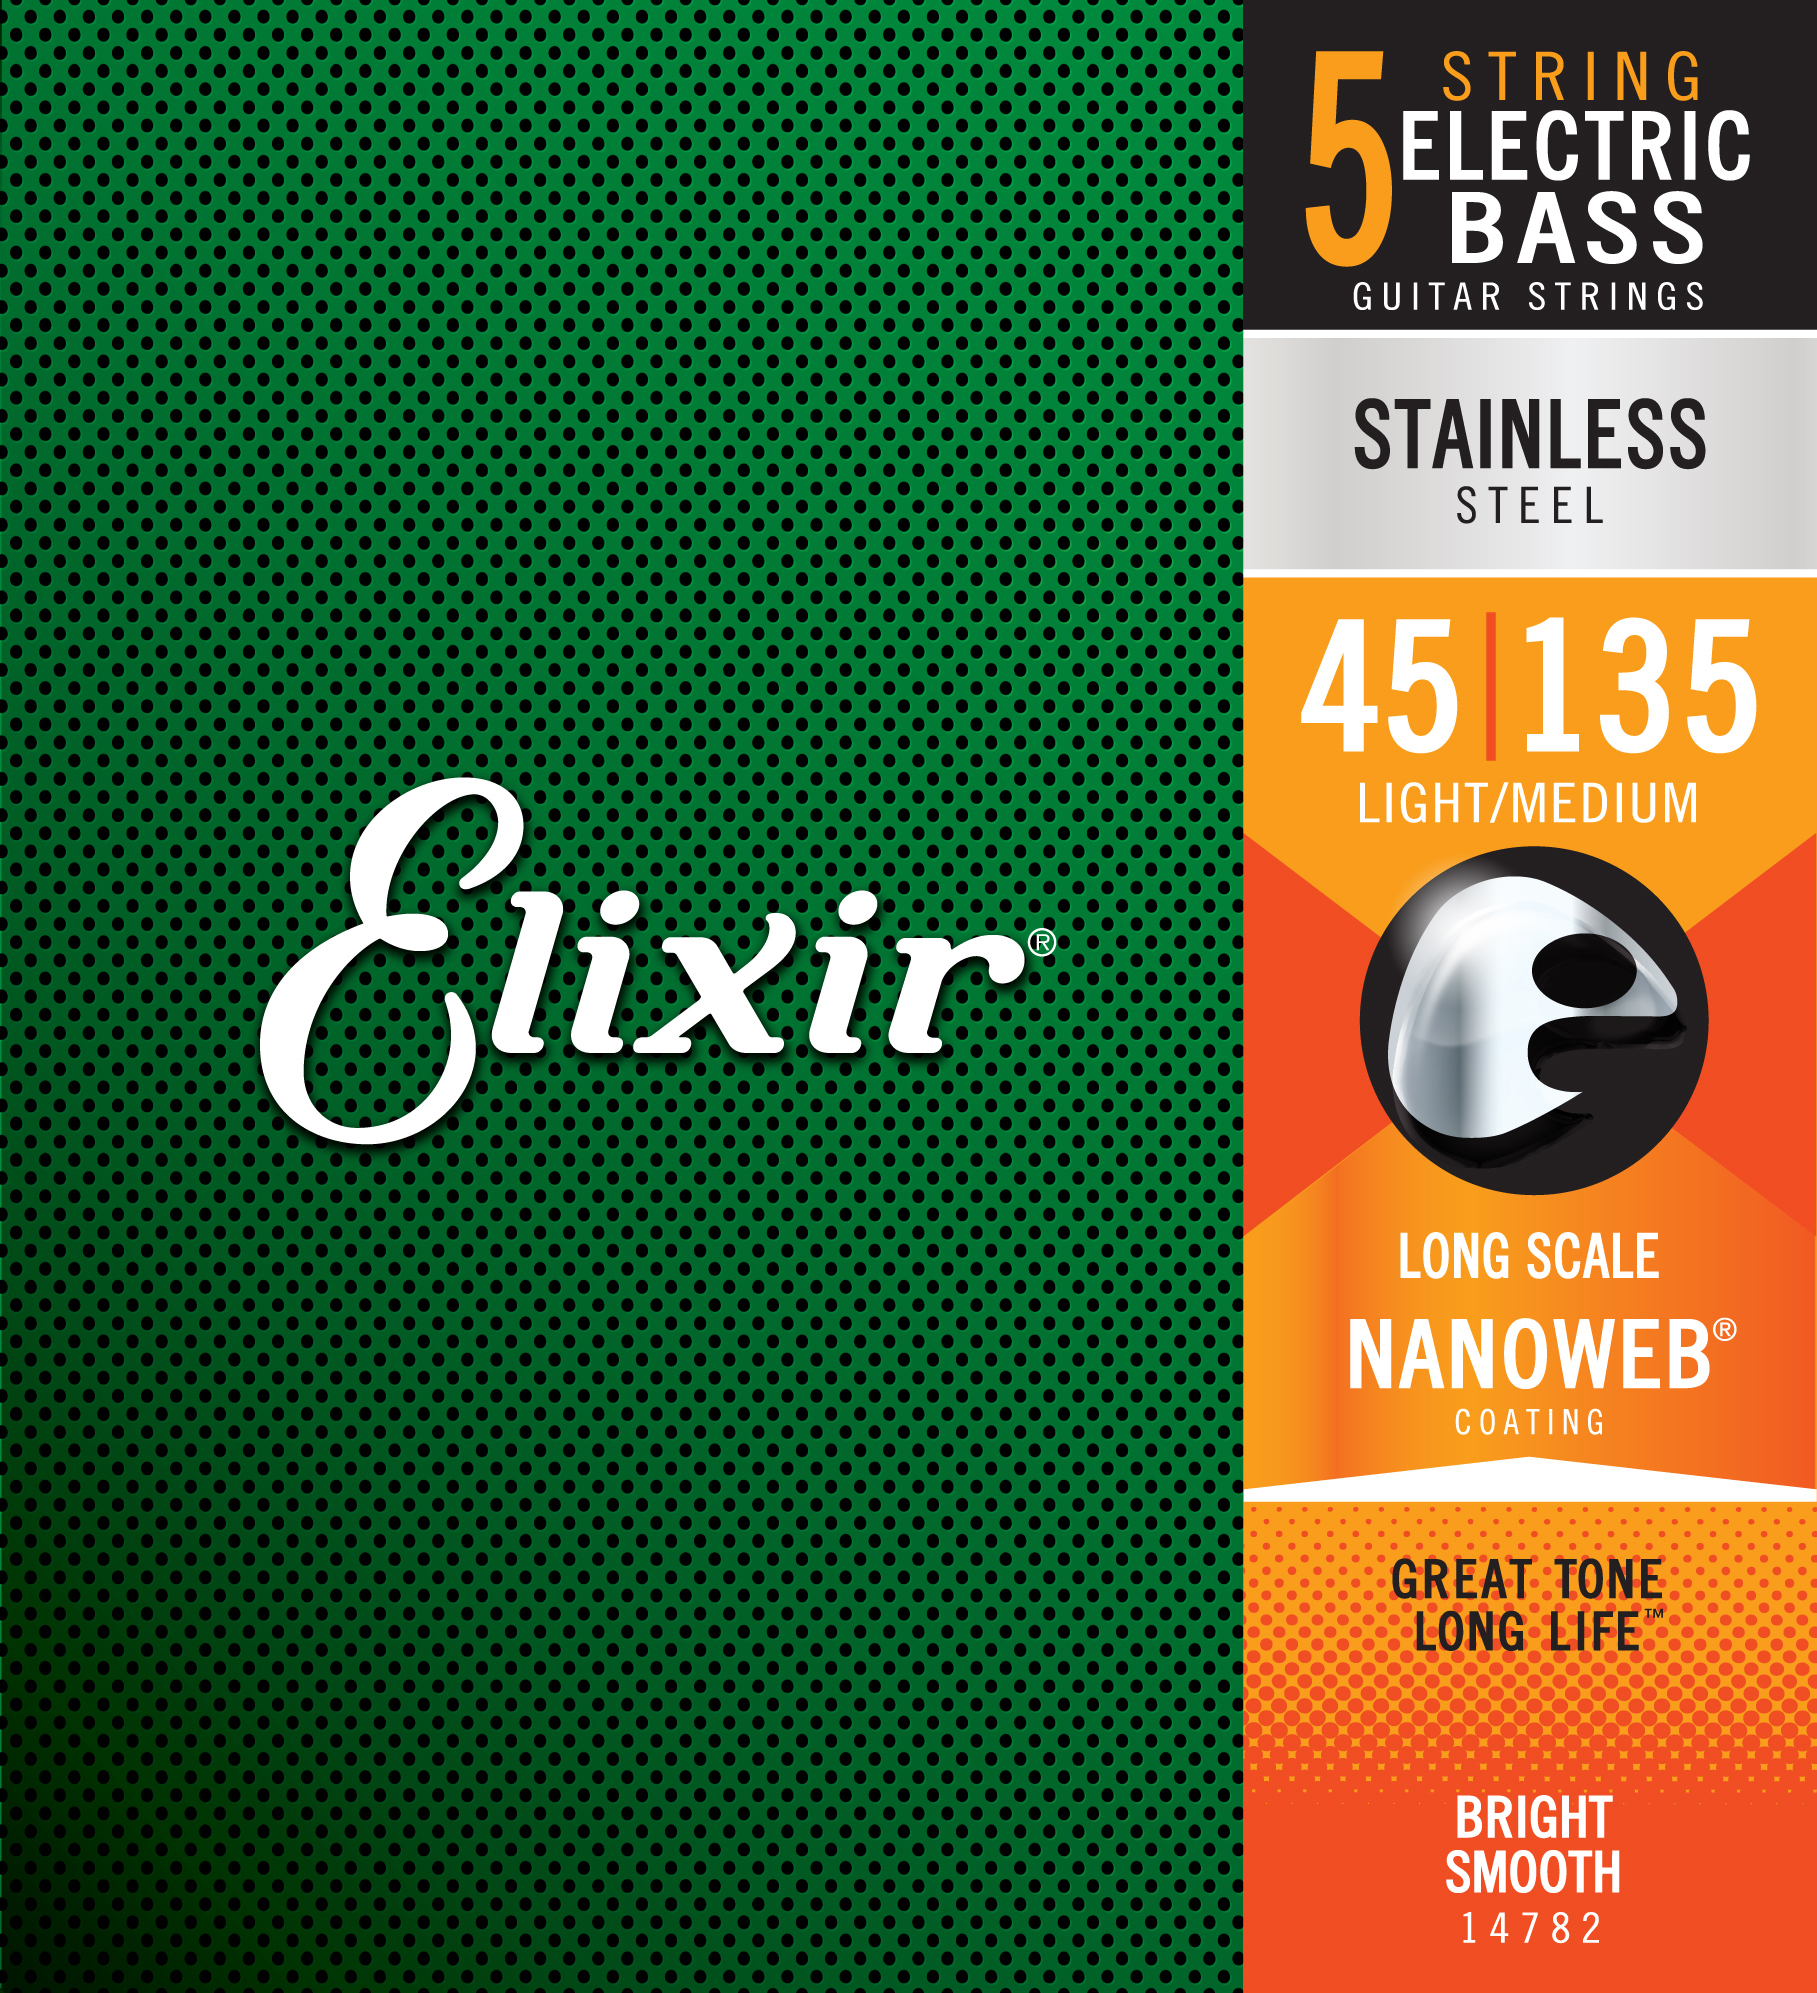 Elixir 14782 5-string Nanoweb Stainless Steel Long Scale Electric Bass 5c Light Medium 45-135 - Electric bass strings - Main picture